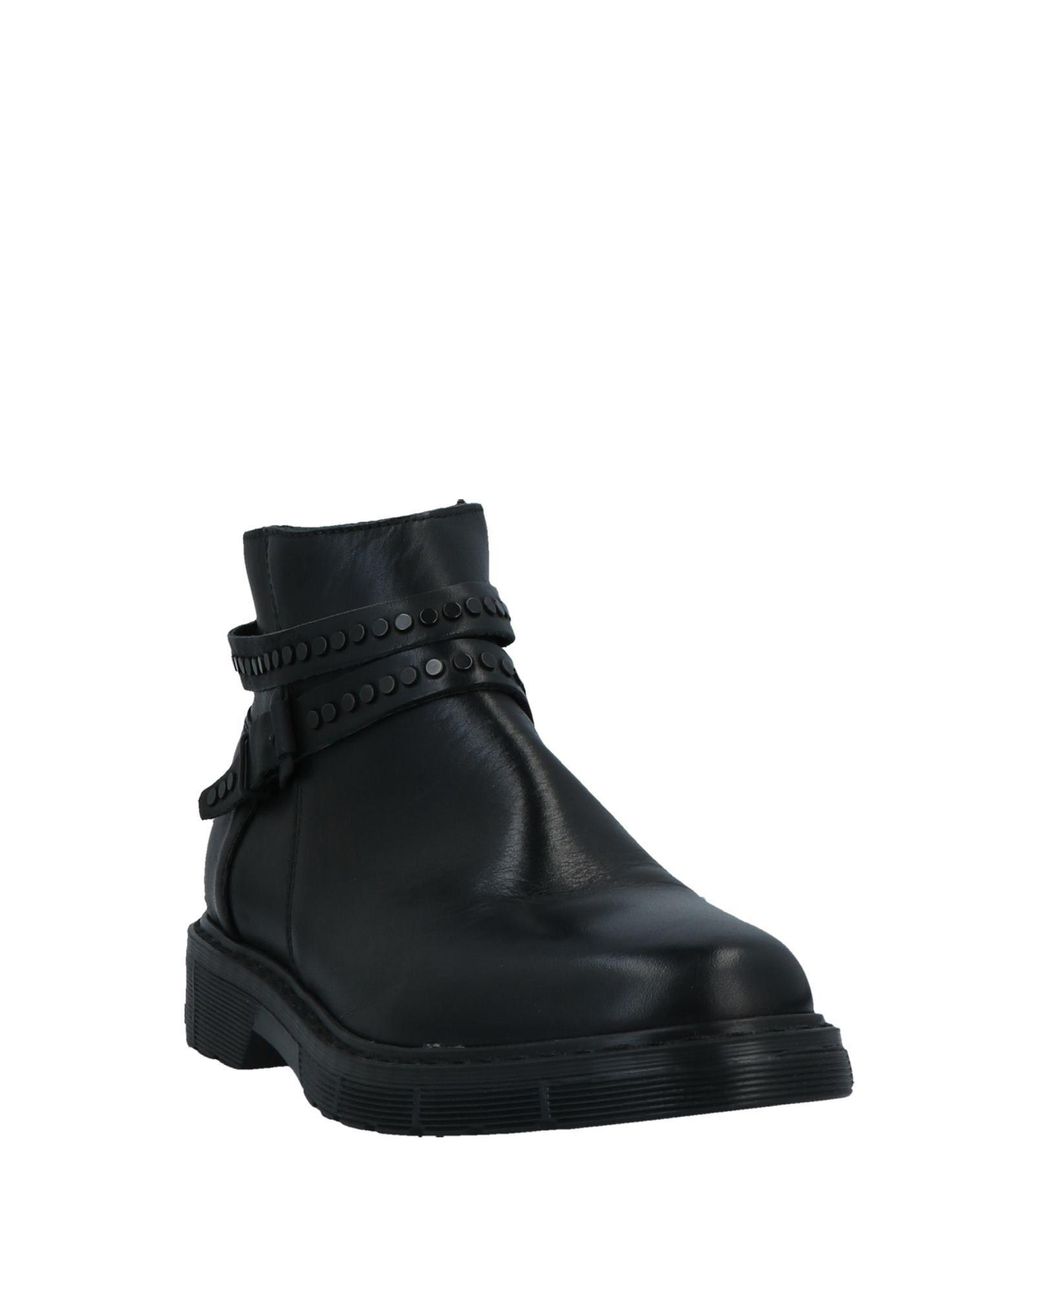 Baldinini Leather Ankle Boots in Black - Lyst